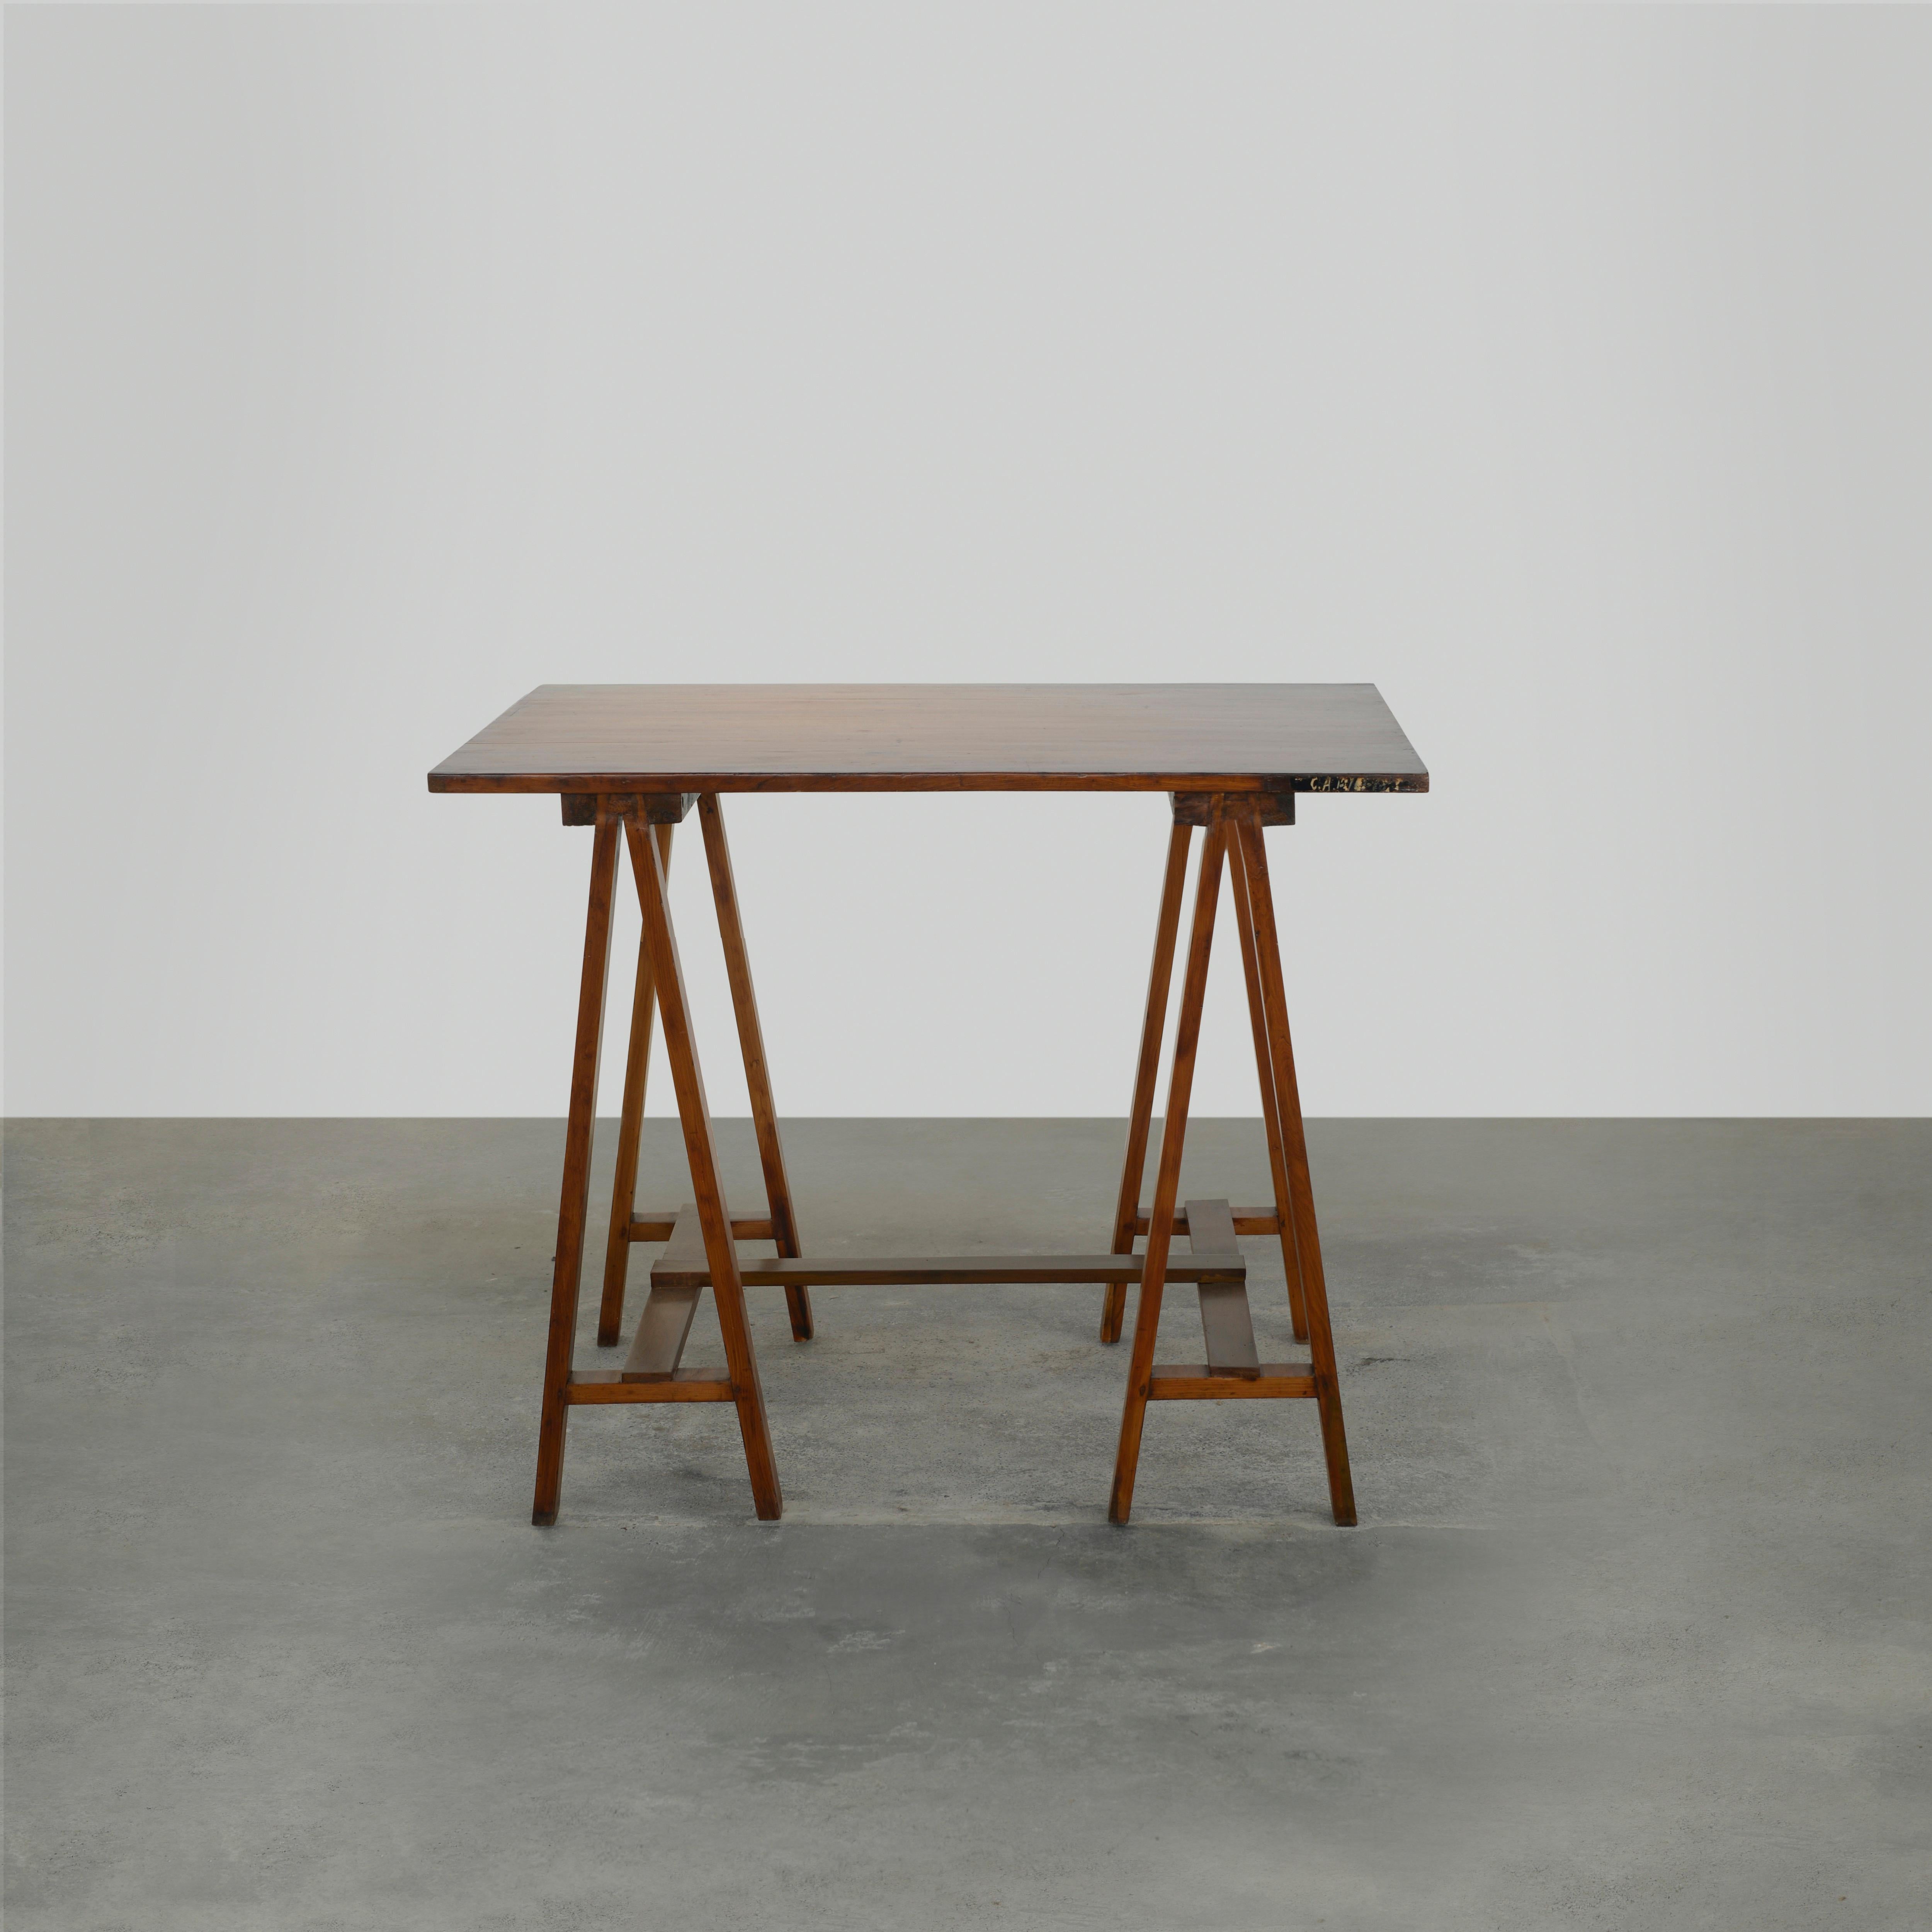 This collapsible architect table is a fantastic piece, it’s a rare Chandigarh item with a great history behind it. It is raw in its simplicity, embodying an expressing the pure ideas of Pierre Jeanneret. There is something deeply touching about this